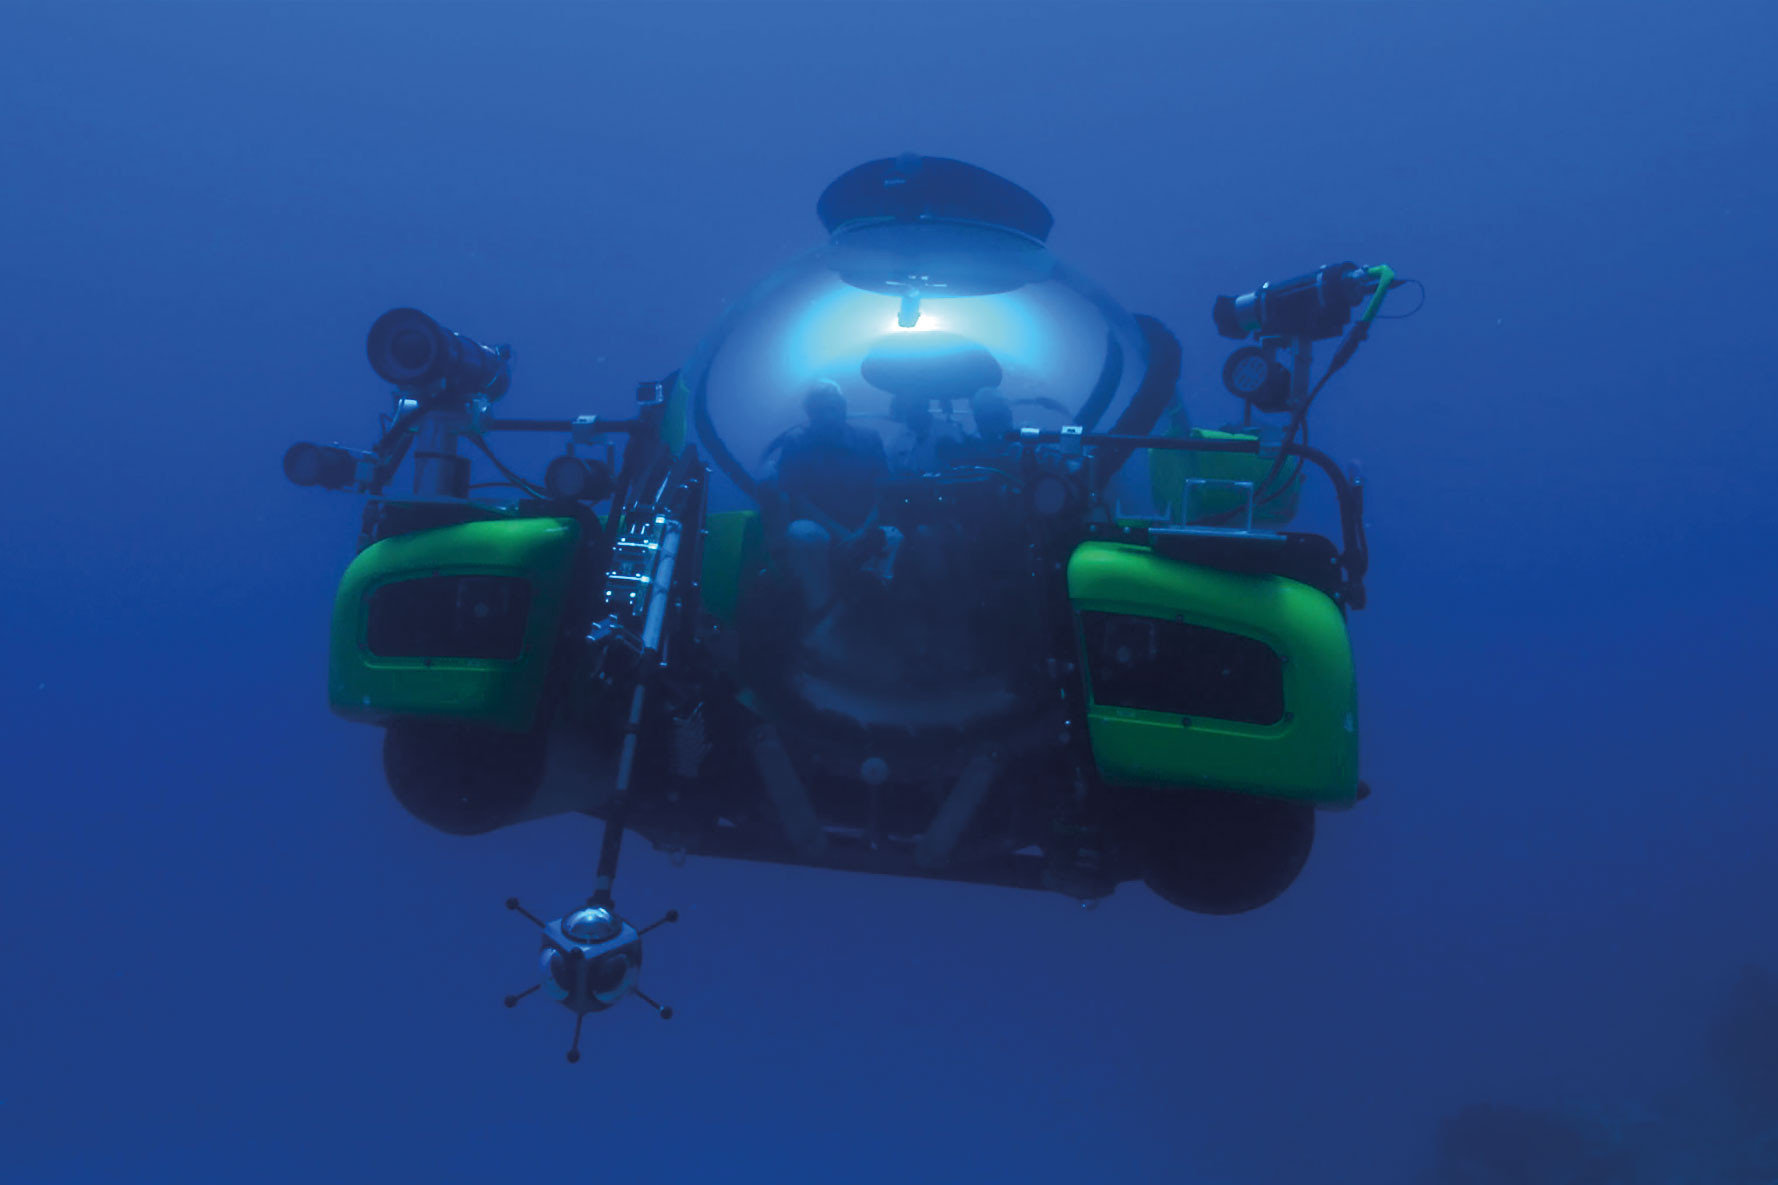 IMAGE-2-David-Attenborough-dives-on-the-GBR-in-a-Triton-Submarine,-which-is-being-filmed-by-a-Virtual-Reality-rig-(c)-Atlantic-Productions